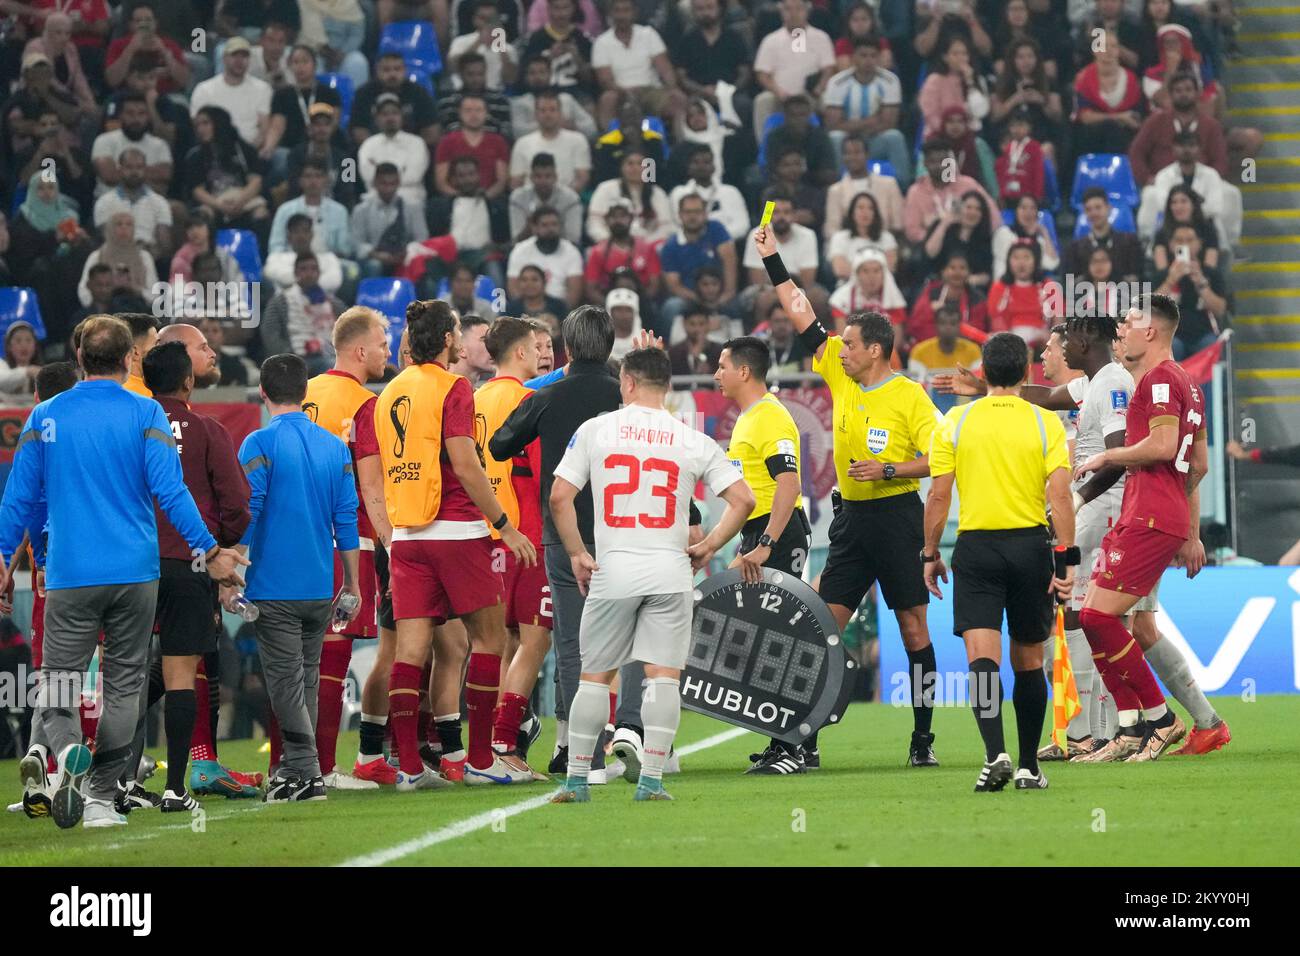 Doha, Qatar. 2nd Dec, 2022. Referee Fernando Andres Rapallini (5th R) gives a yellow card to Serbia's goalkeeper Predrag Rajkovic during the Group G match between Serbia and Switzerland at the 2022 FIFA World Cup at Stadium 974 in Doha, Qatar, Dec. 2, 2022. Credit: Li Gang/Xinhua/Alamy Live News Stock Photo